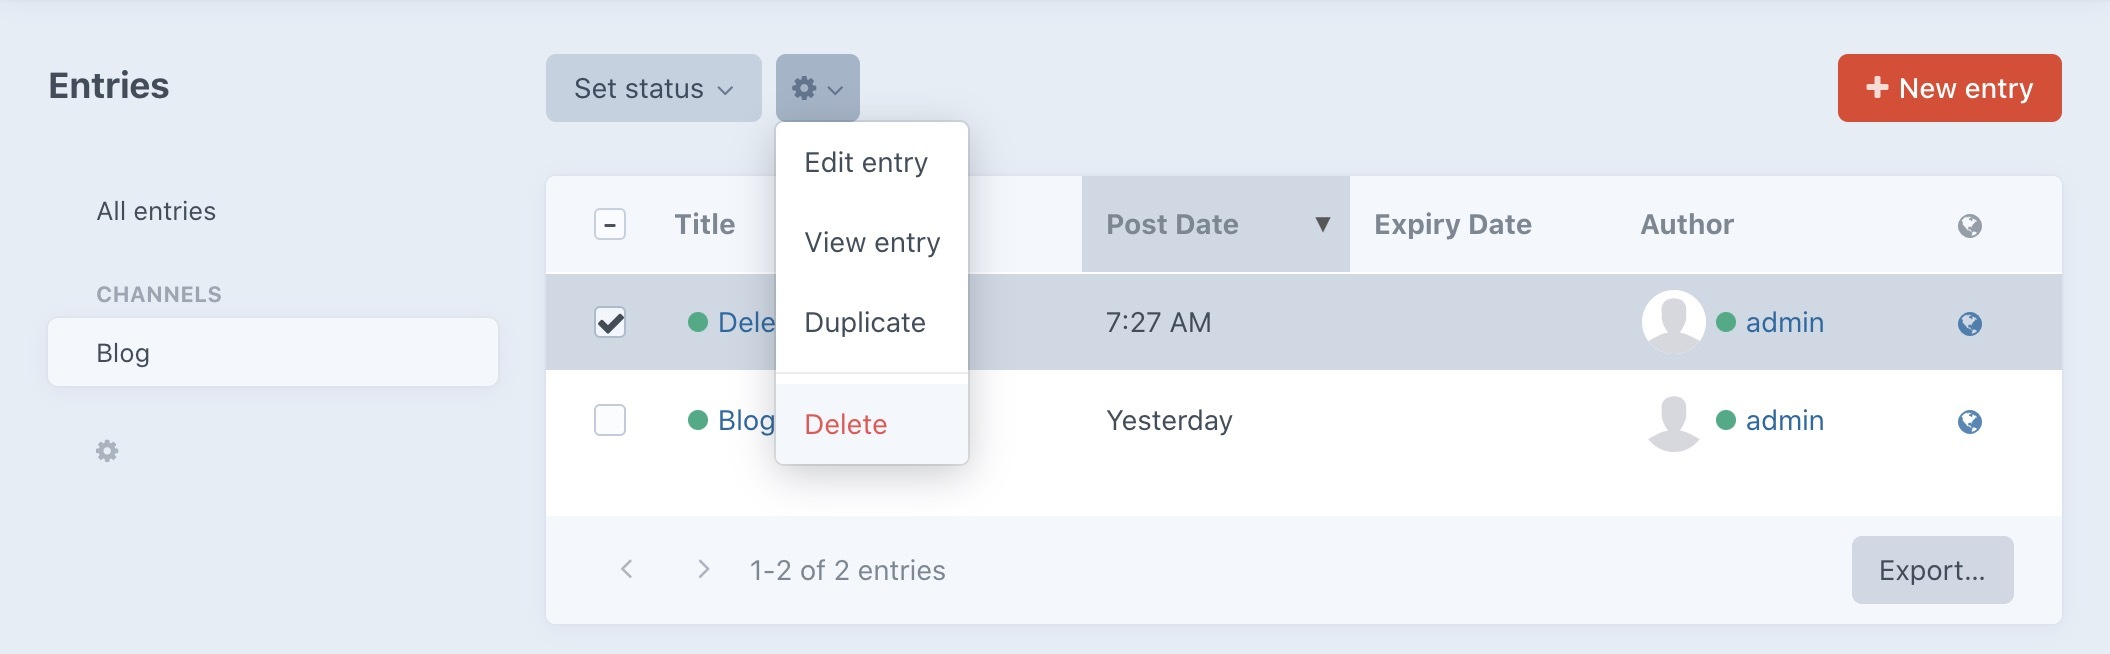 Deleting an entry from the Craft CMS control panel